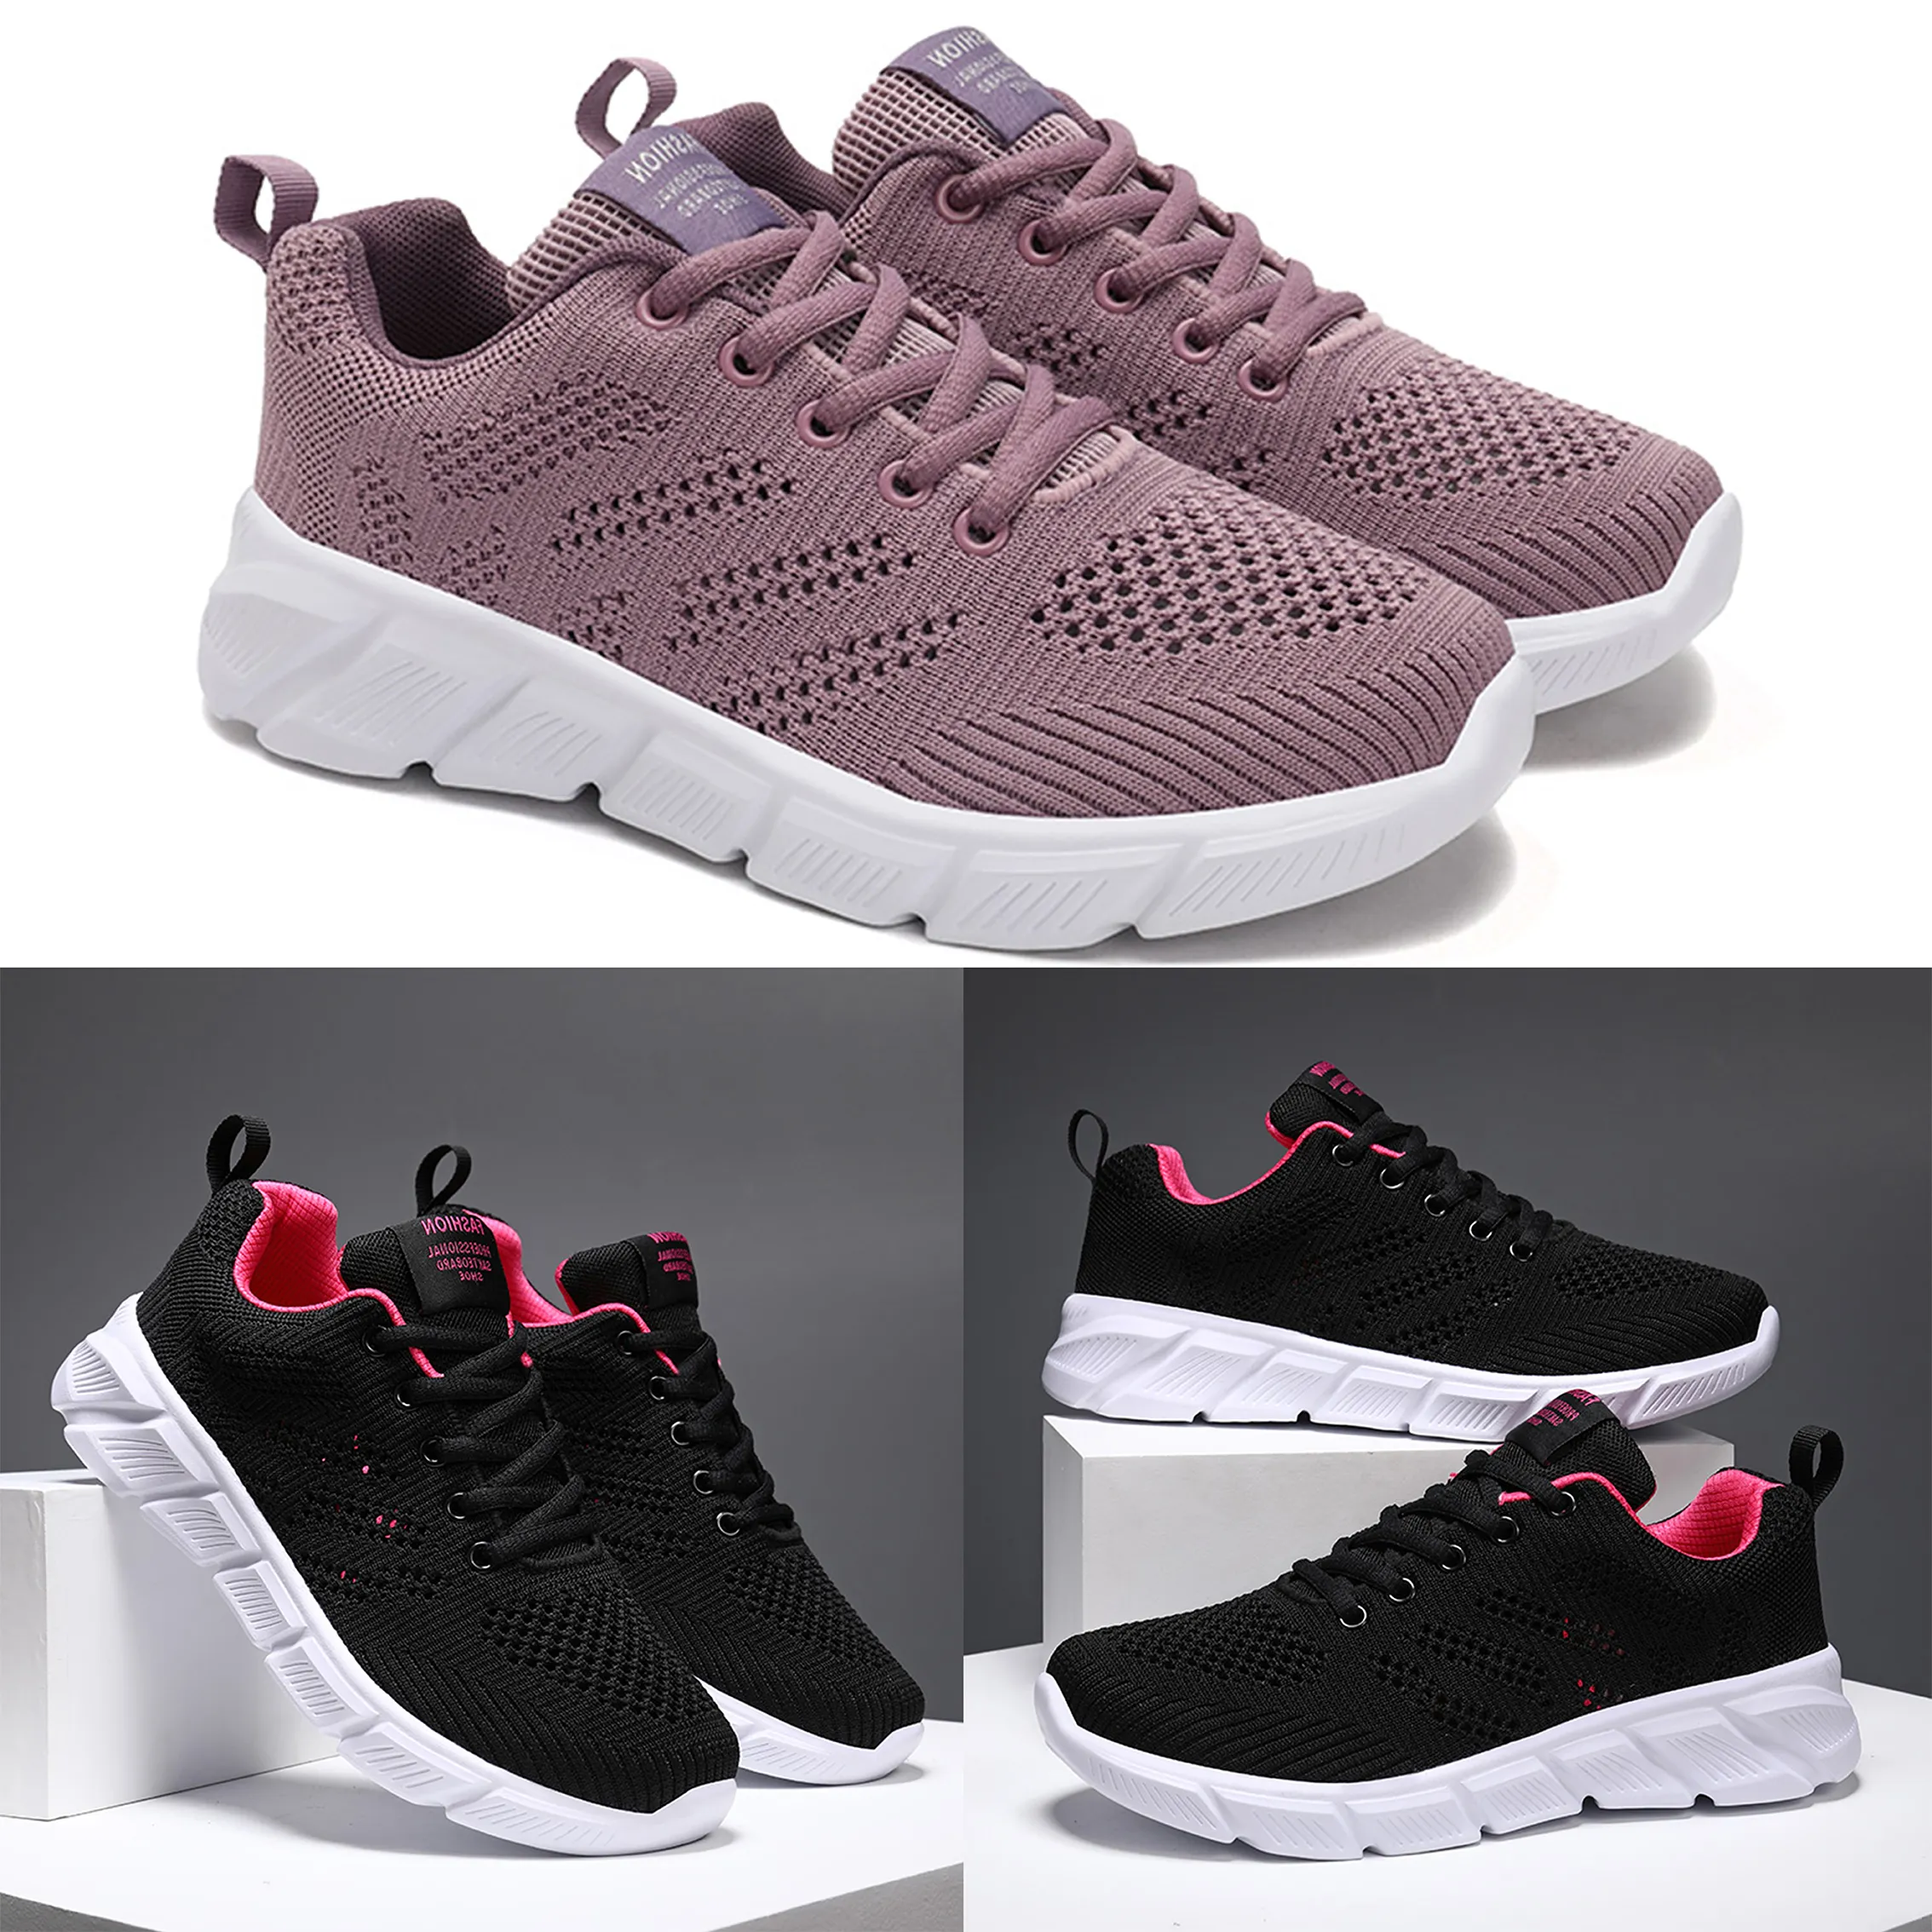 Designer women spring breathable running shoes black purple black rose red womens outdoor sports sneakers Color148